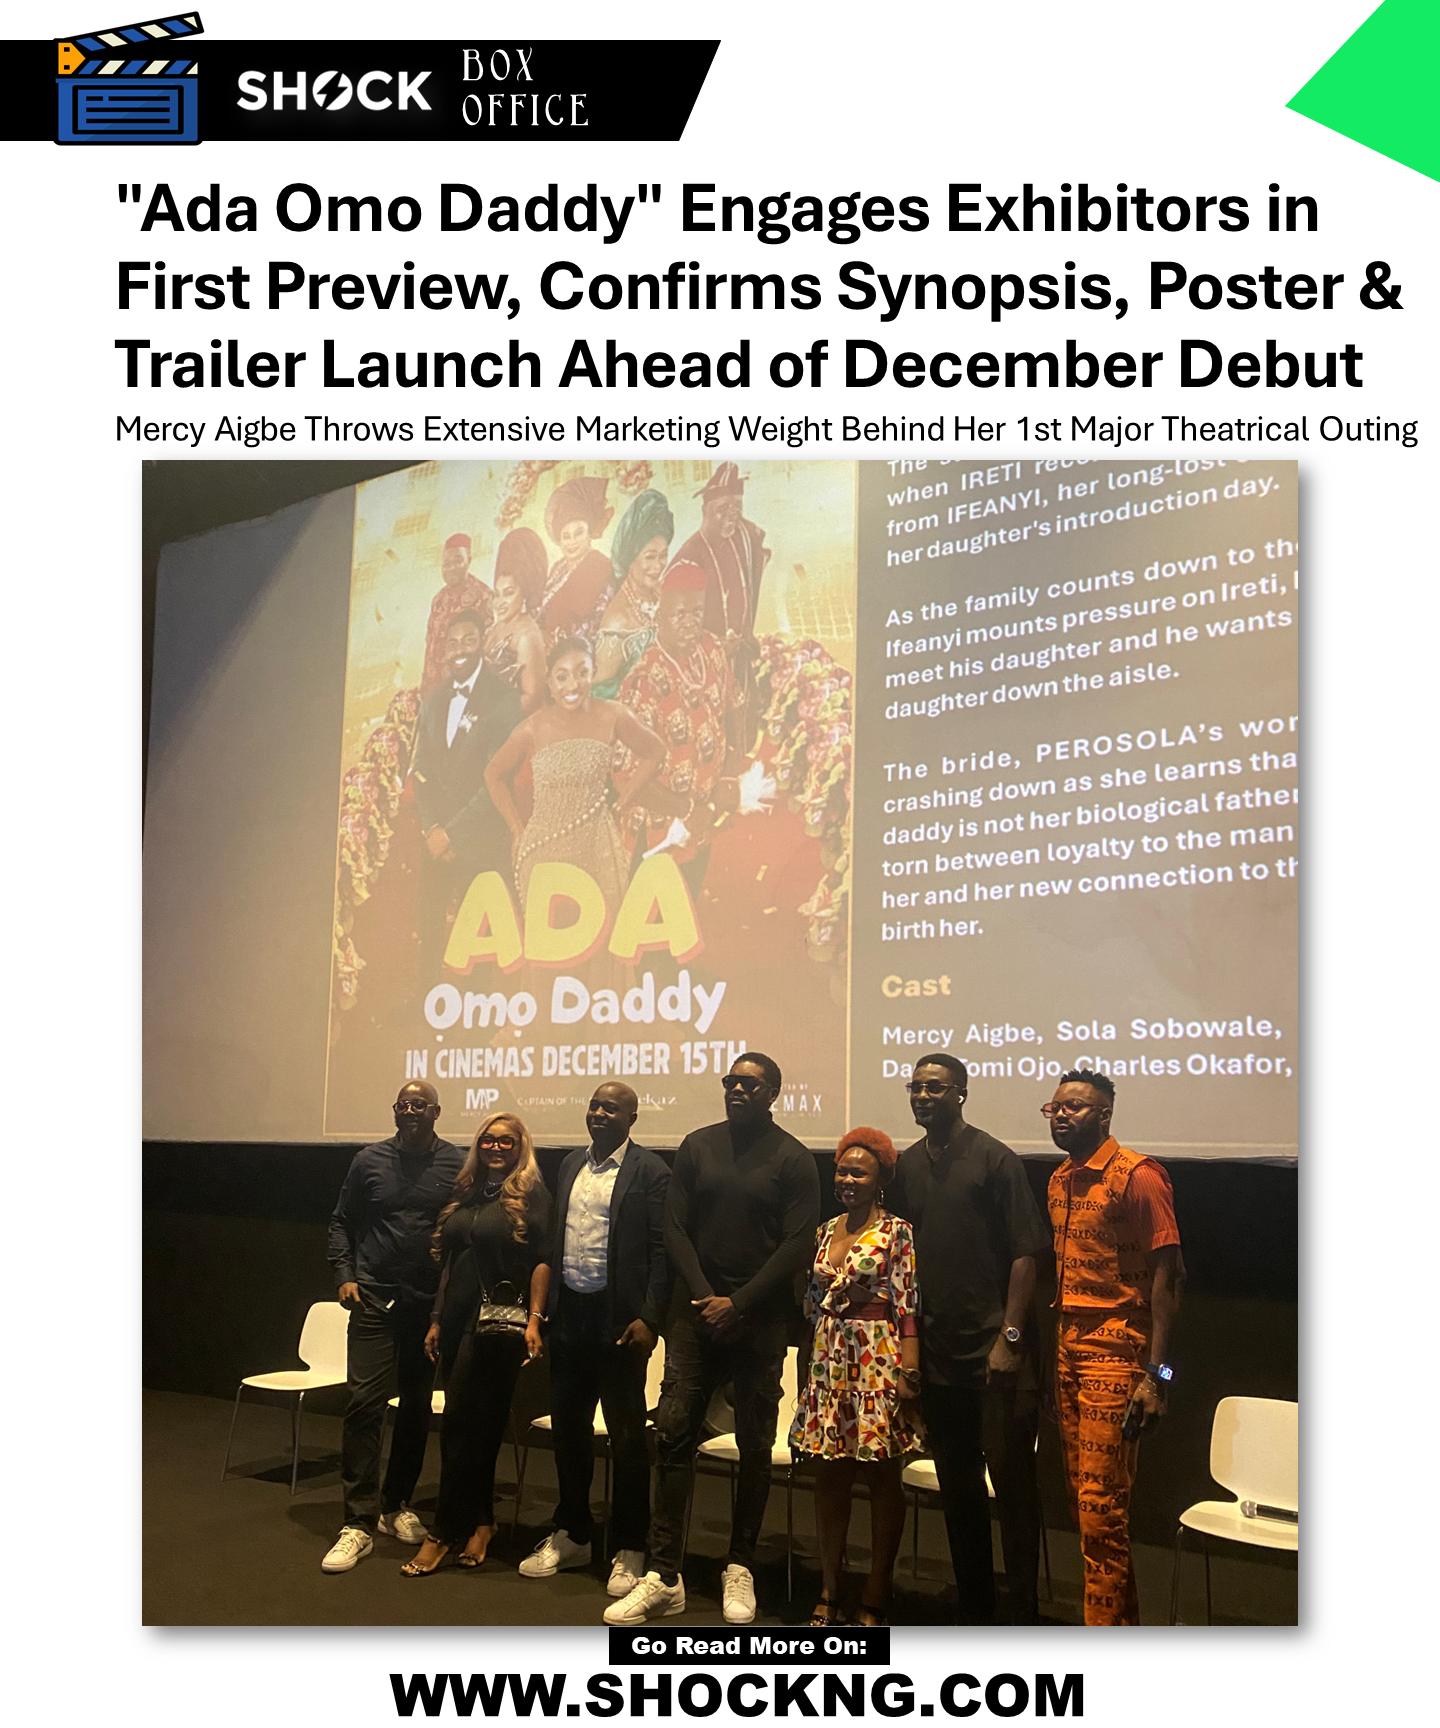 Ada omo daddy movie mercy aigbe - "Ada Omo Daddy" Engages Exhibitors in First Preview, Confirms Synopsis, Poster & Trailer Launch Ahead of December